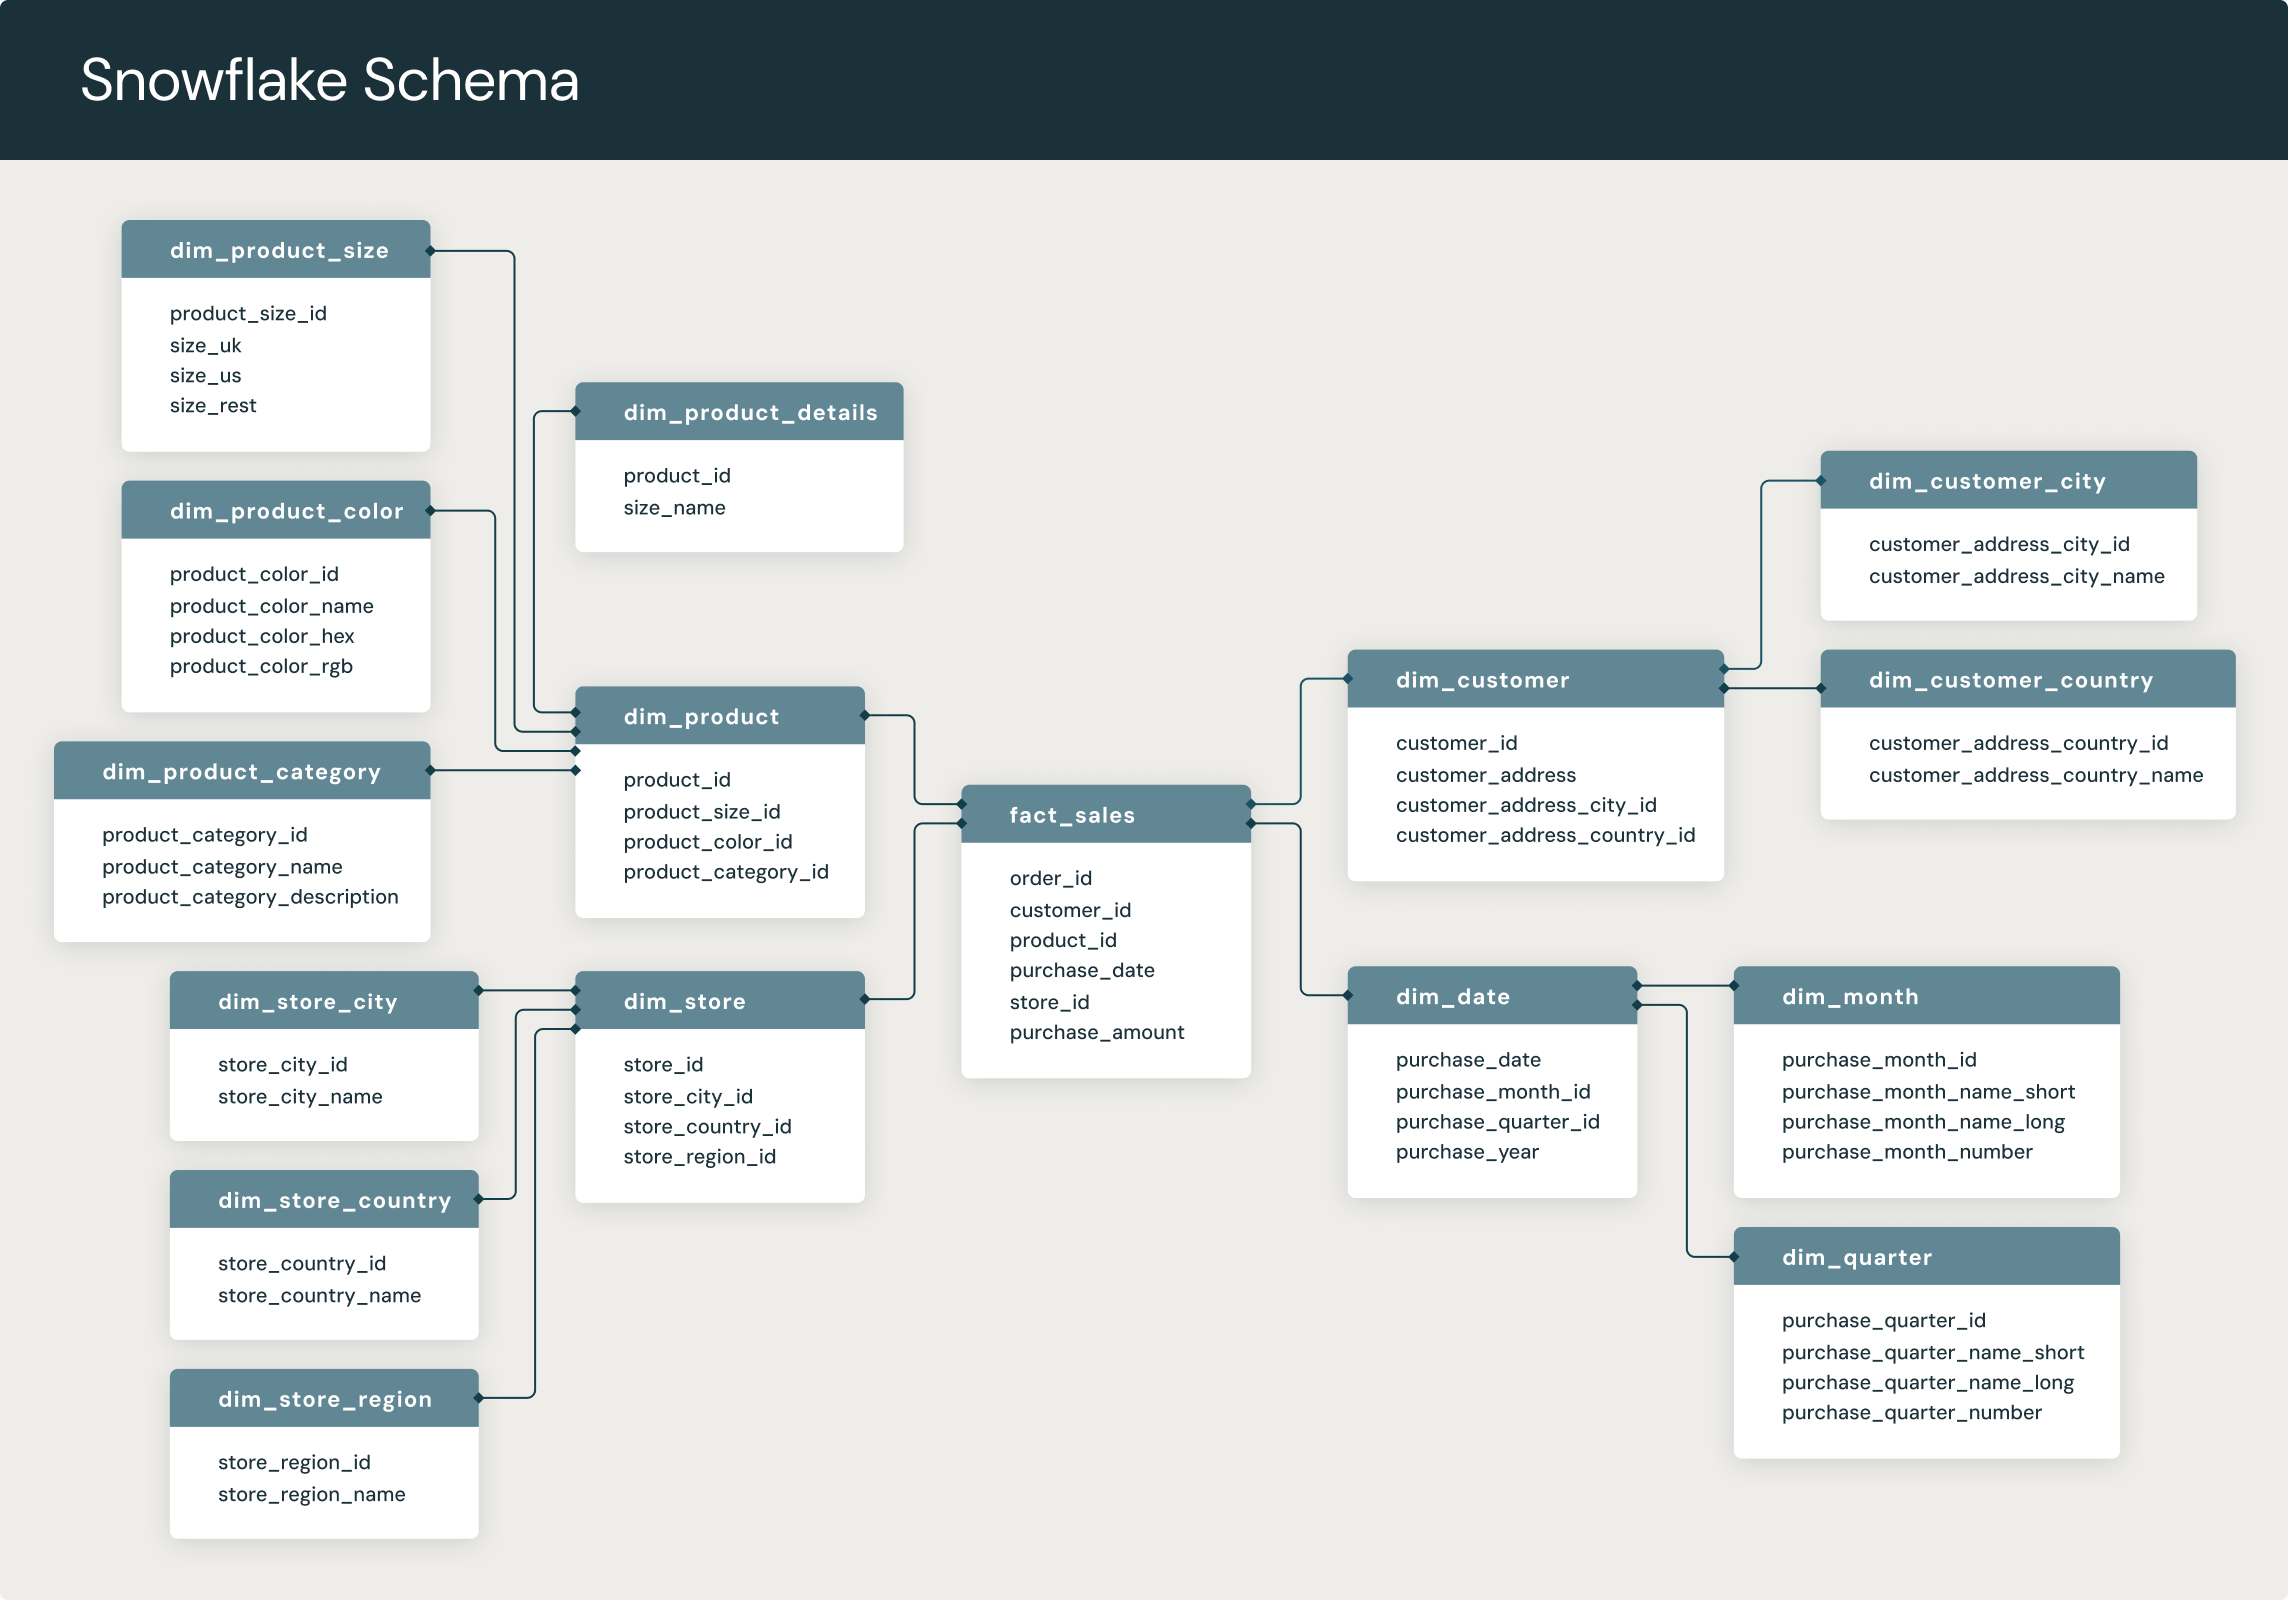 A snowflake schema diagram with a central fact table that connects to multiple dimensional tables and subdimensional tables via foreign keys.